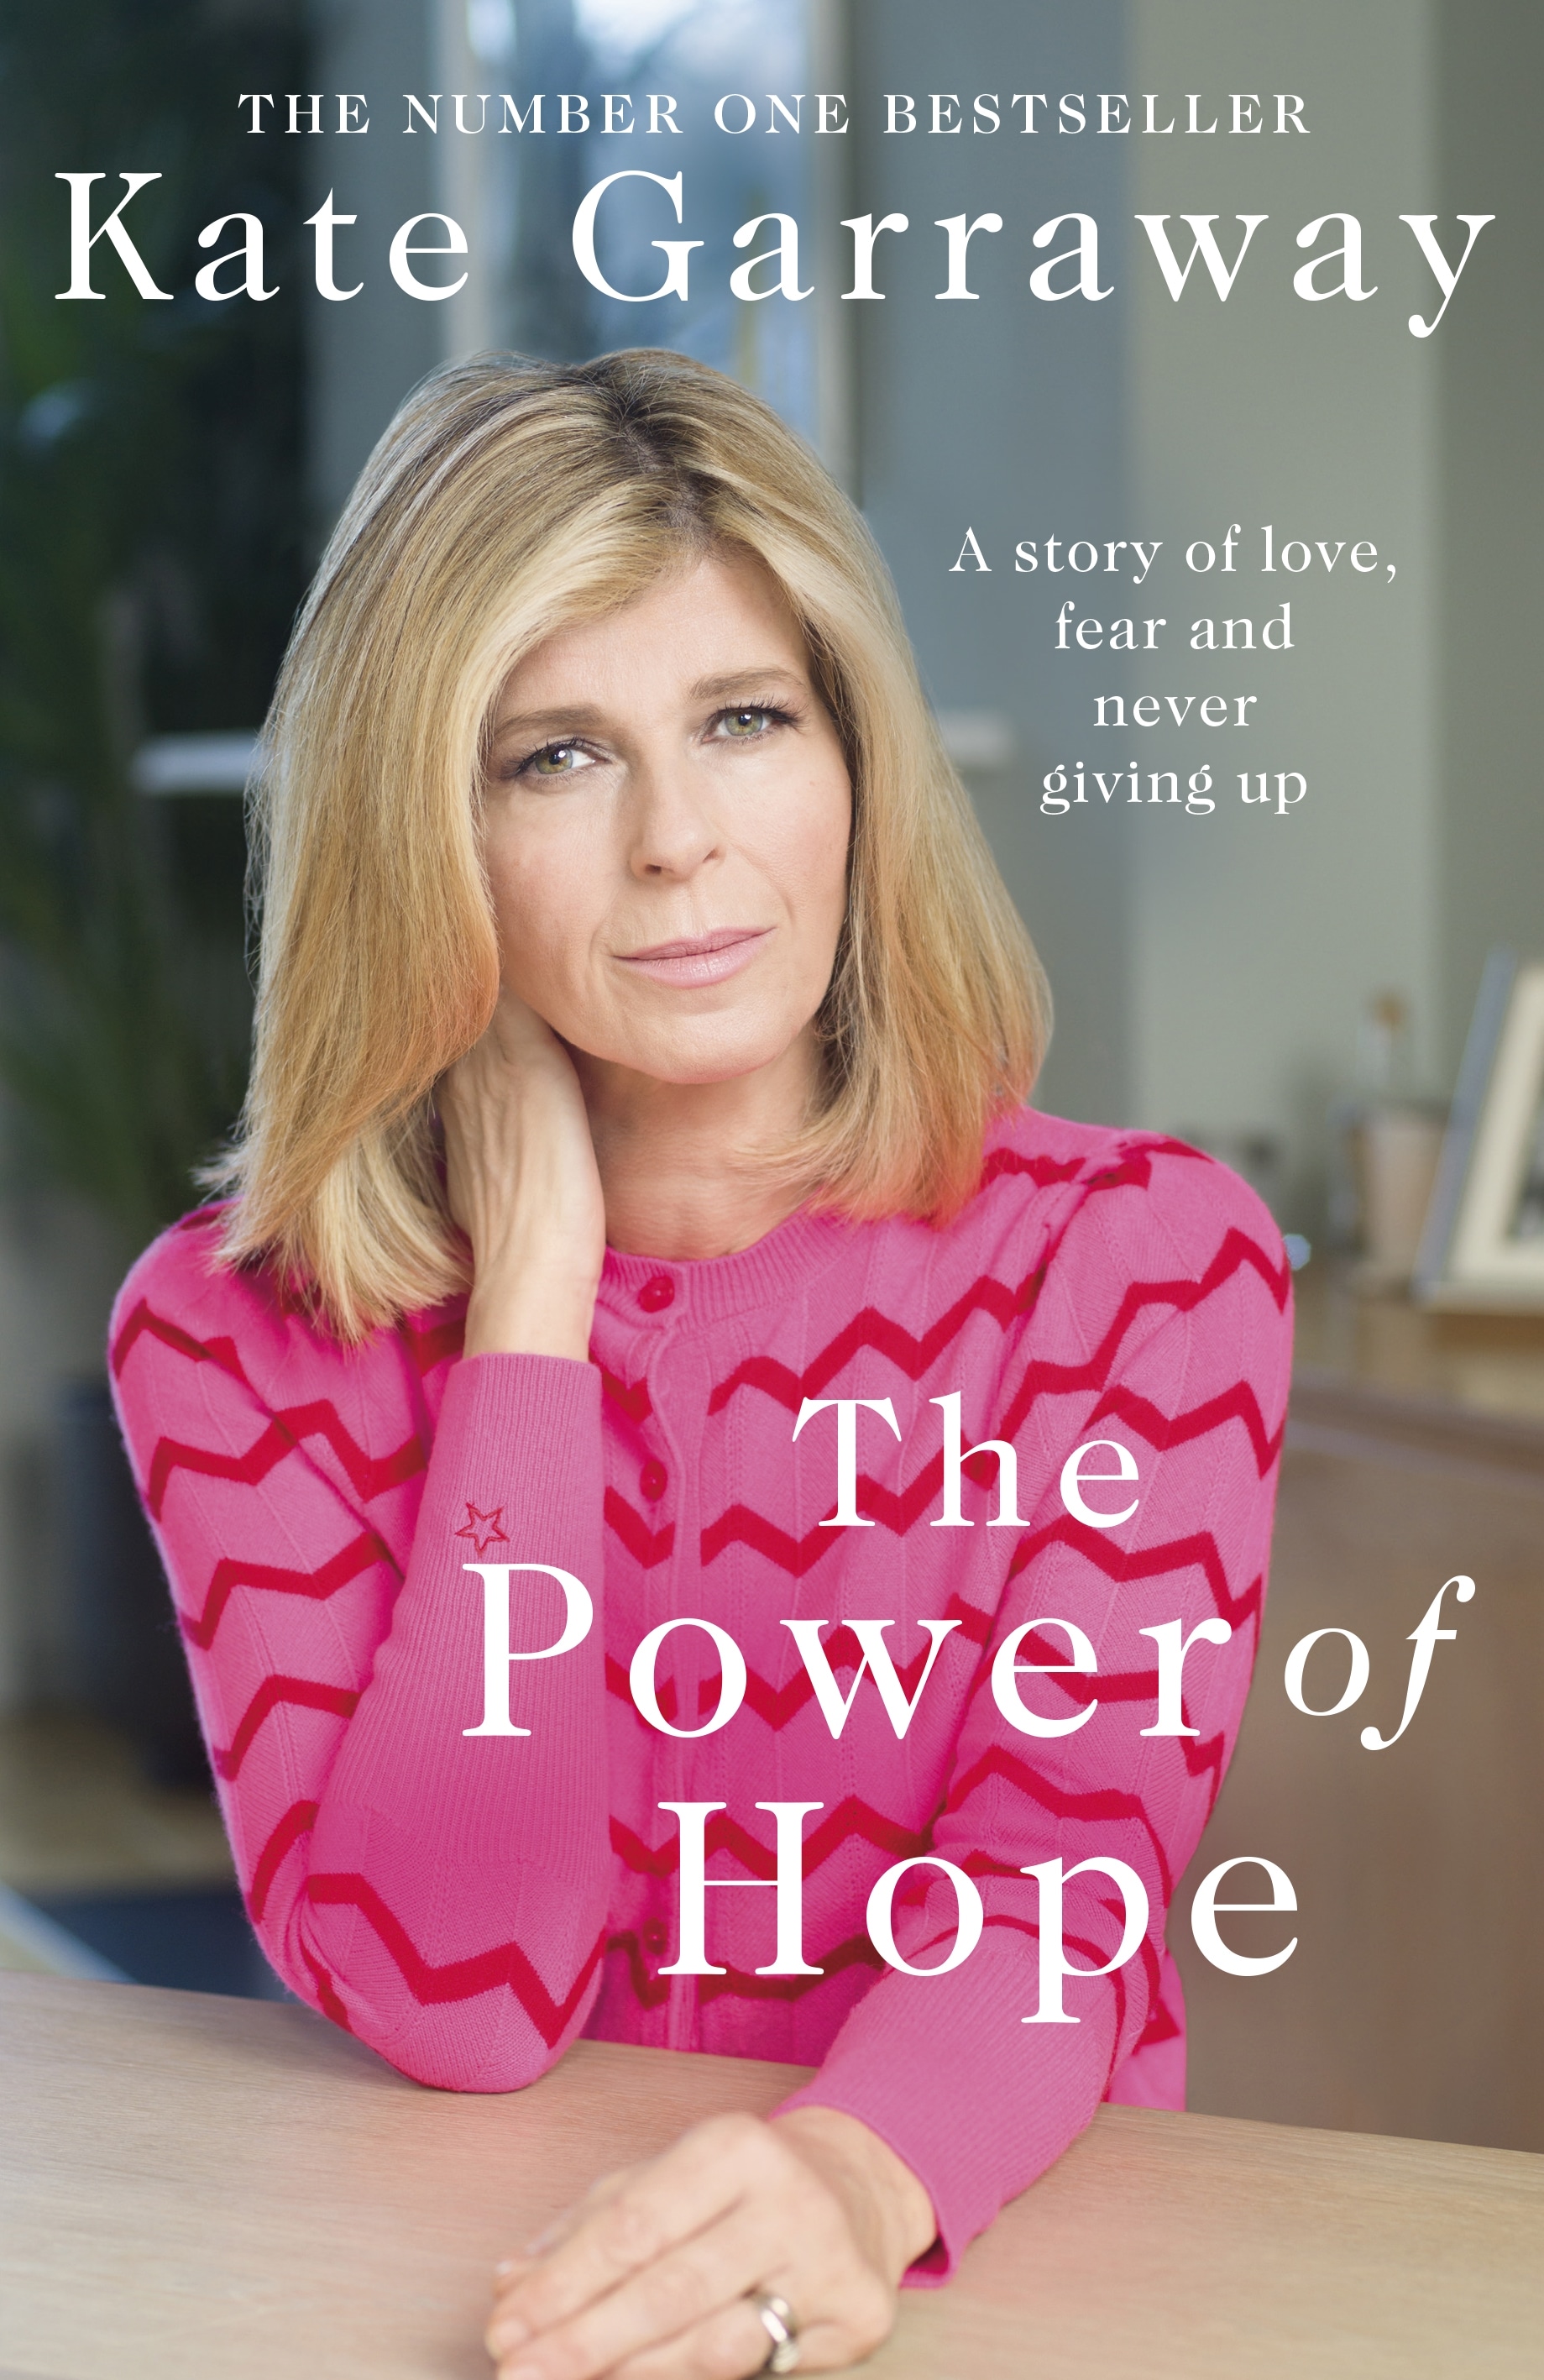 Book “The Power Of Hope” by Kate Garraway — April 29, 2021